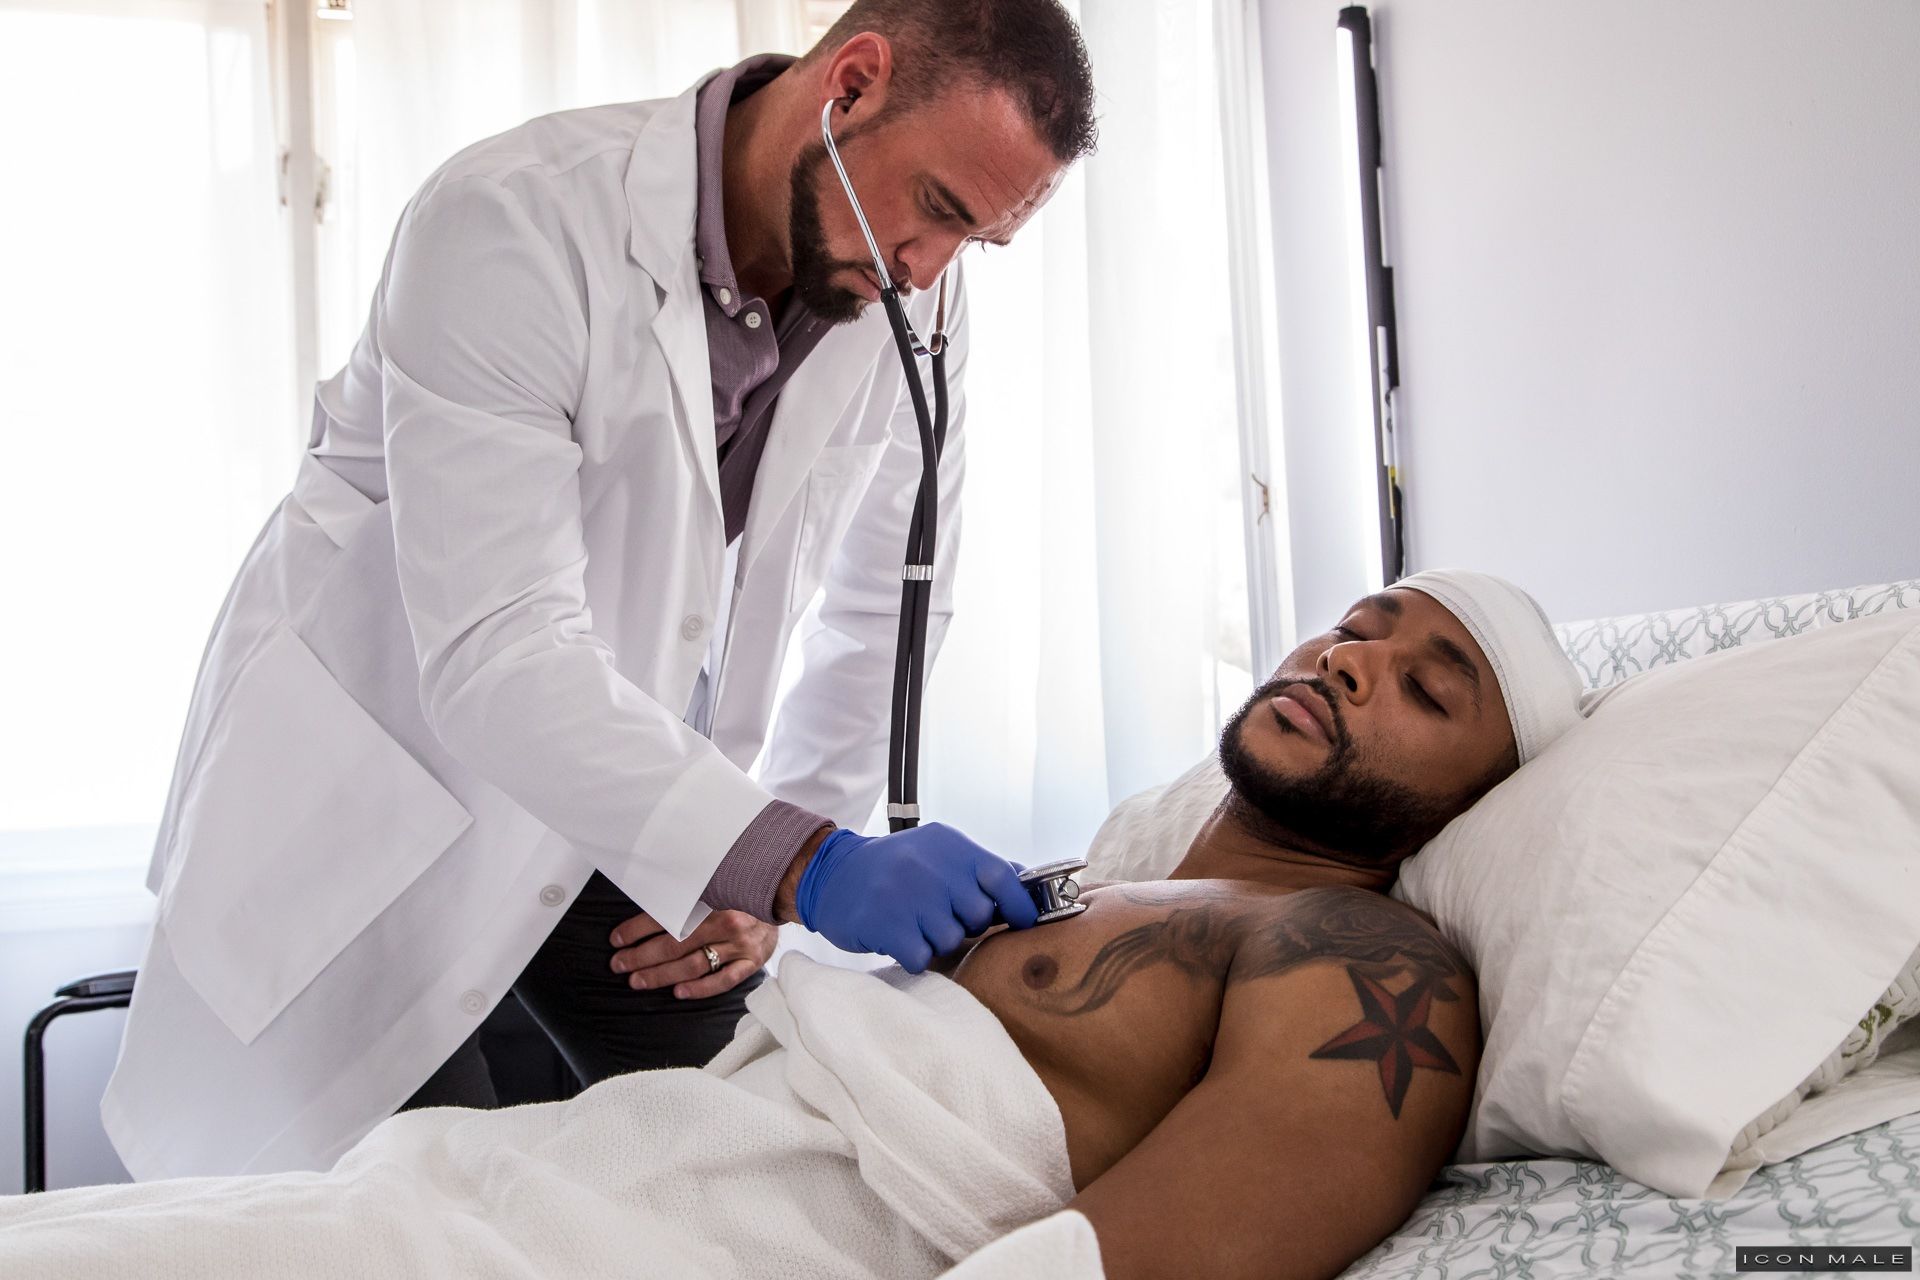 IconMale - The Doctor Is In Me - Michael Roman & Jaxx Maxim.